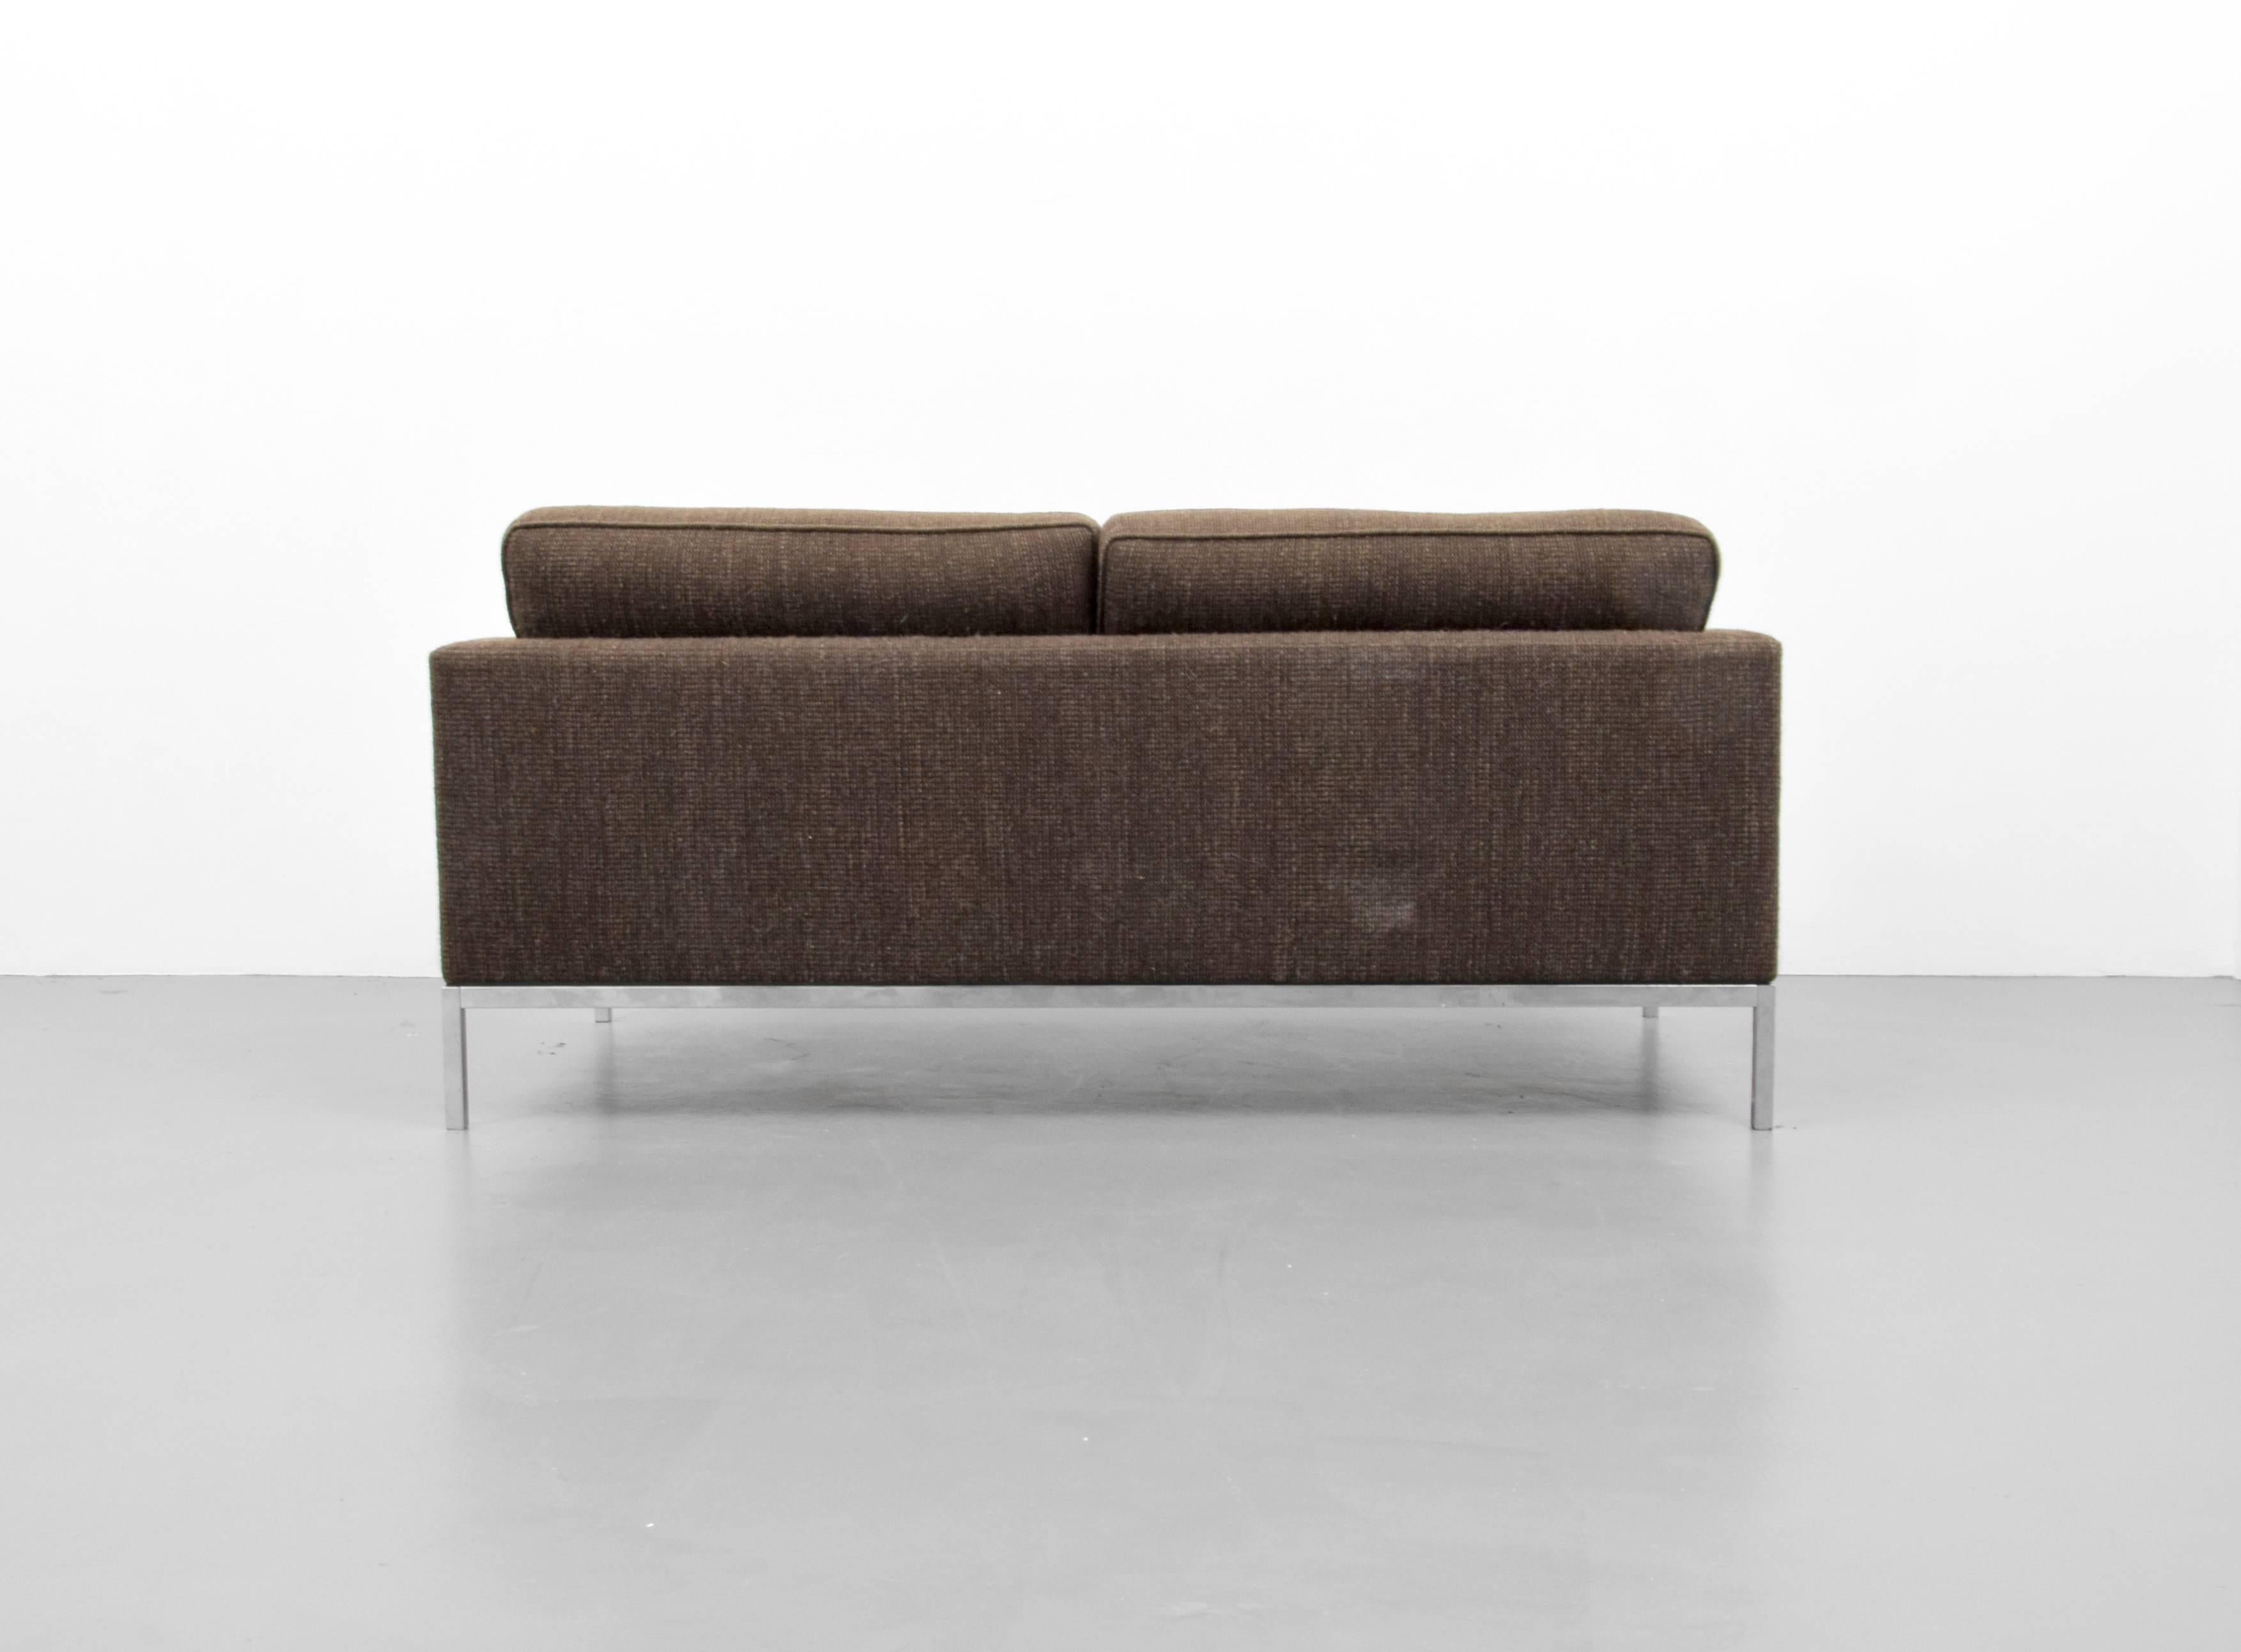 Sofa by Florence Knoll for Knoll. Reference (similar form): Knoll Furniture, Steven and Linda Rouland, pg. 94.